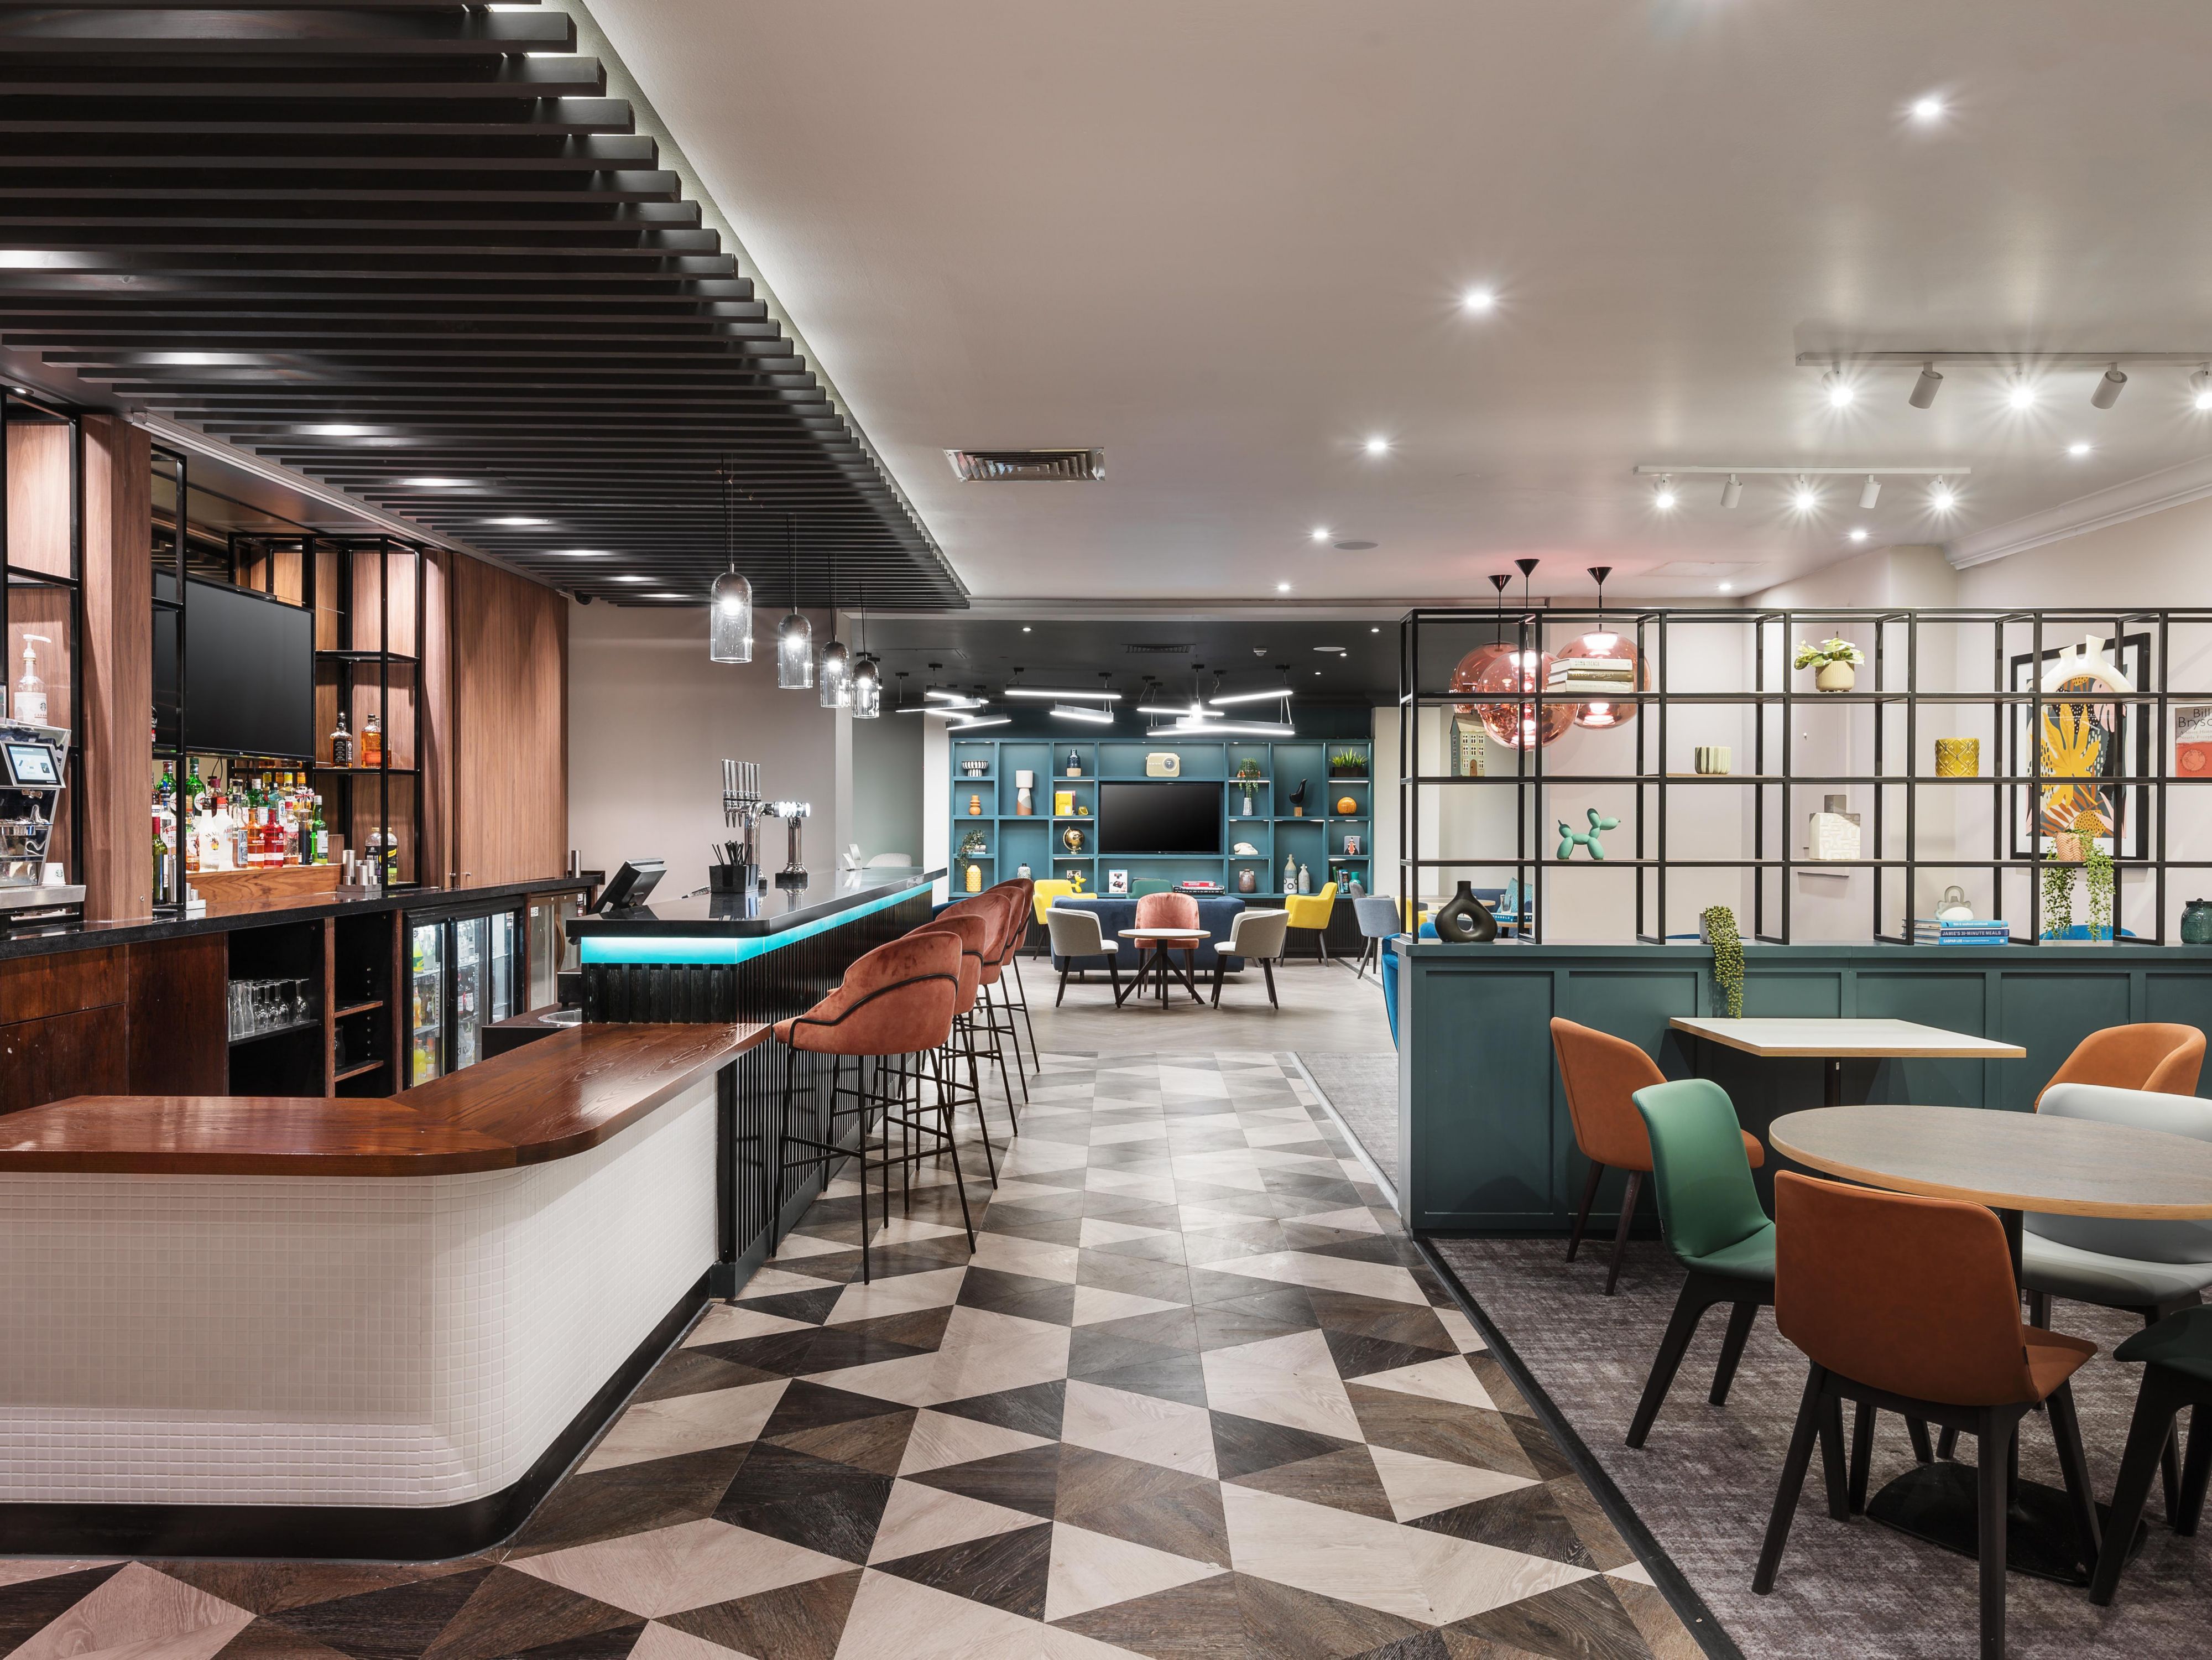 Our Open Lobby offers a wide range of delicious dining options, while the bar provides an informal and relaxed space to unwind, grab a light bite to eat, or use as an informal place to catch up on work. We also have ample outdoor seating so you can enjoy a spot of al fresco dining on warmer days. 